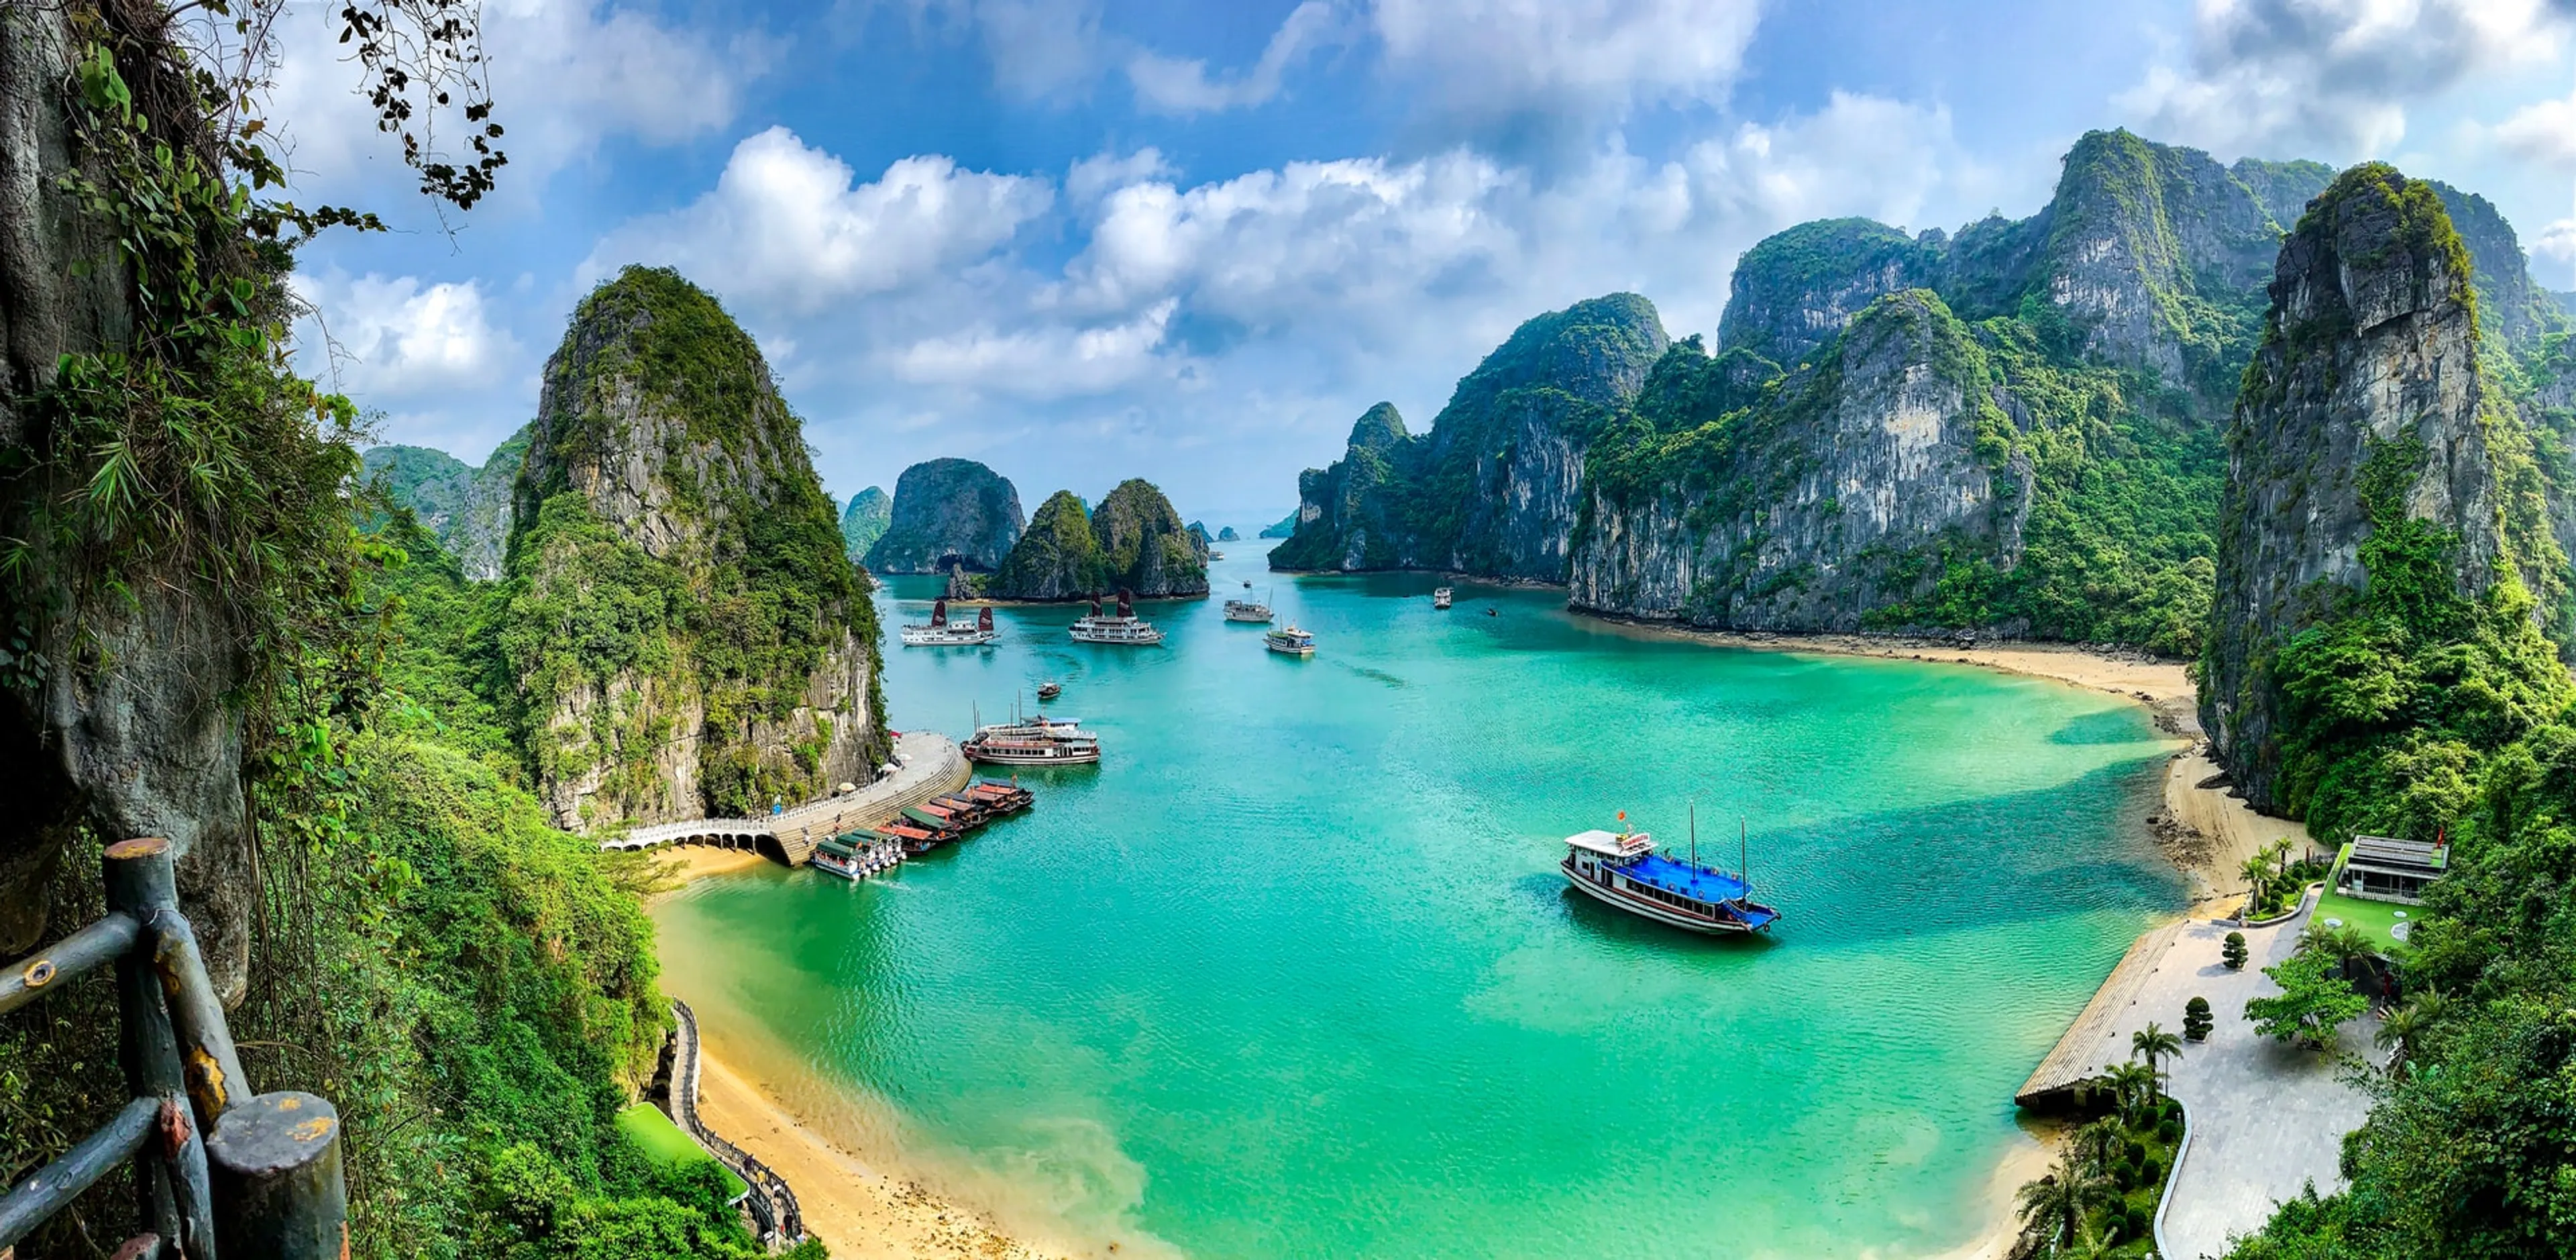 Insider Tips on How to Get the Most From Halong Bay